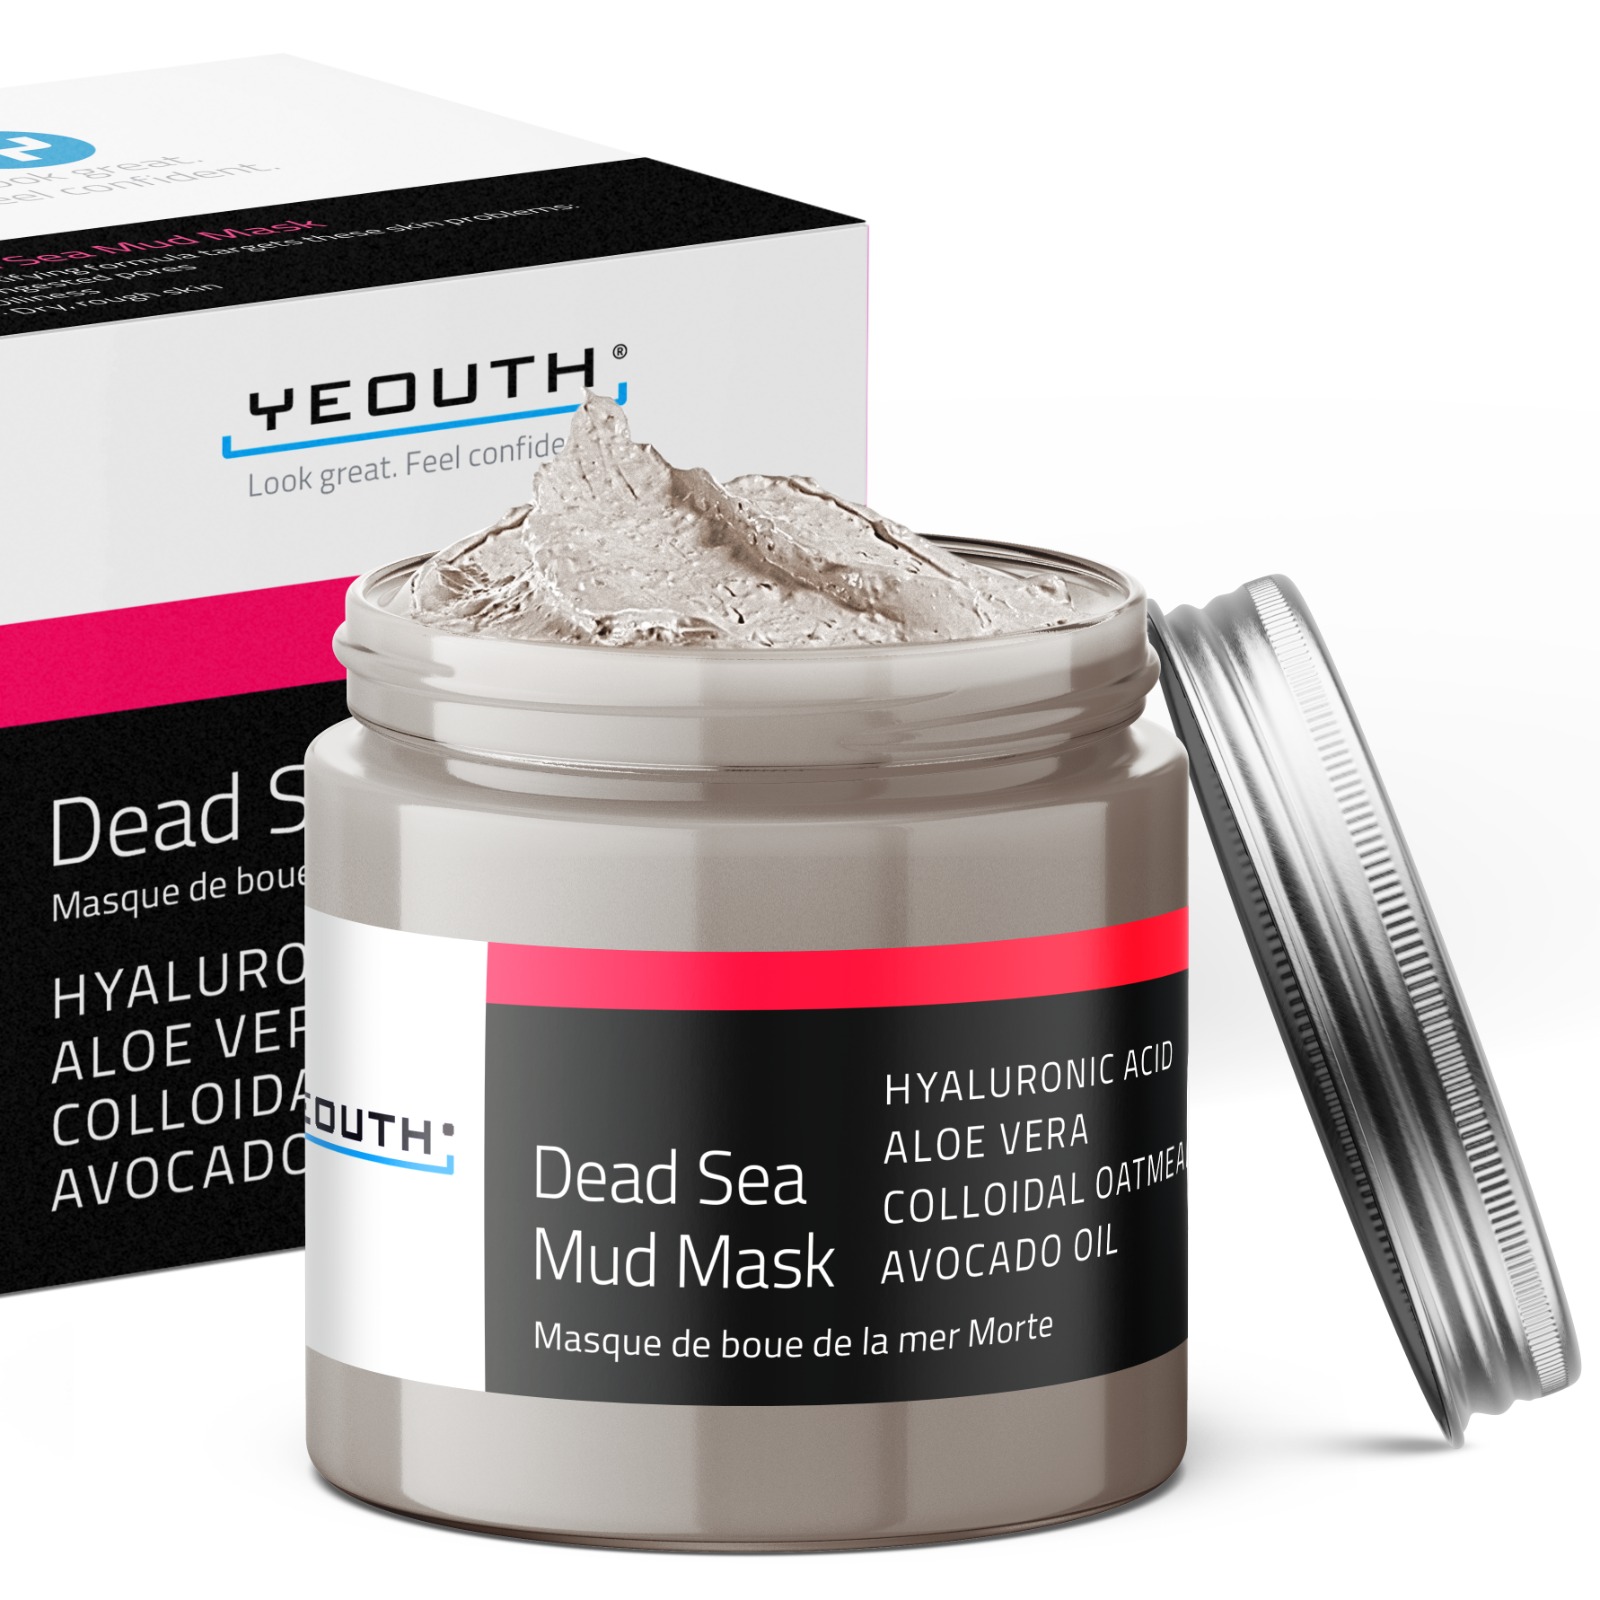 Dead Sea Mud Masks for face with Hyaluronic Acid, Face Masks Skincare Clay Mud for Pore, Wrinkles, Acne & Dark Spots, Anti Aging Facial & Beauty Face Masks for Women & Men by YEOUTH 8oz - image 1 of 7